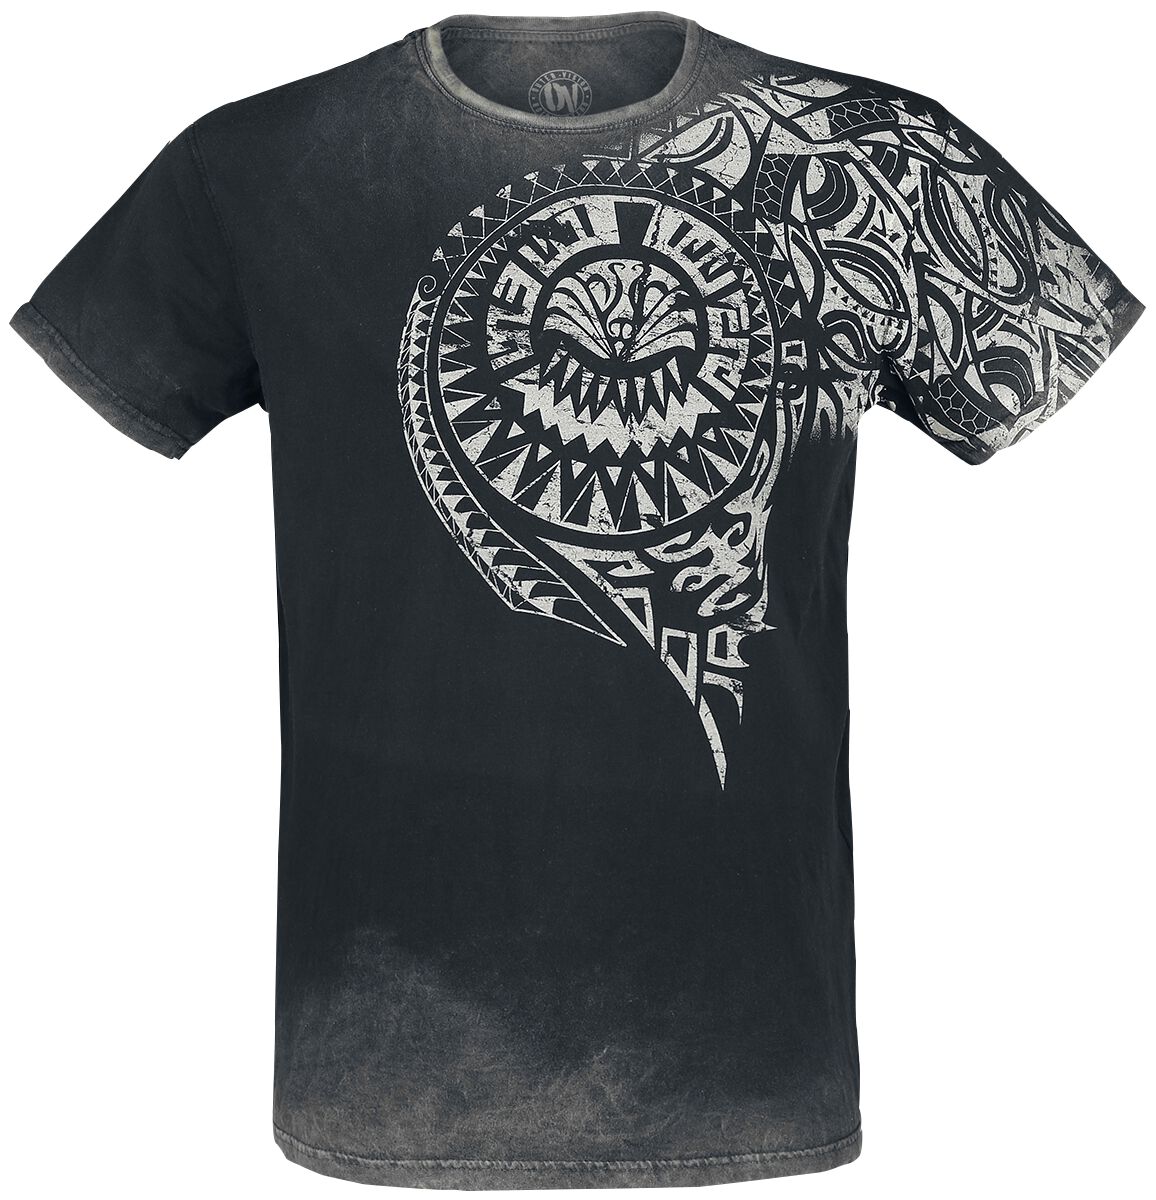 Outer Vision Burned Tattoo T-Shirt grau in 4XL von Outer Vision